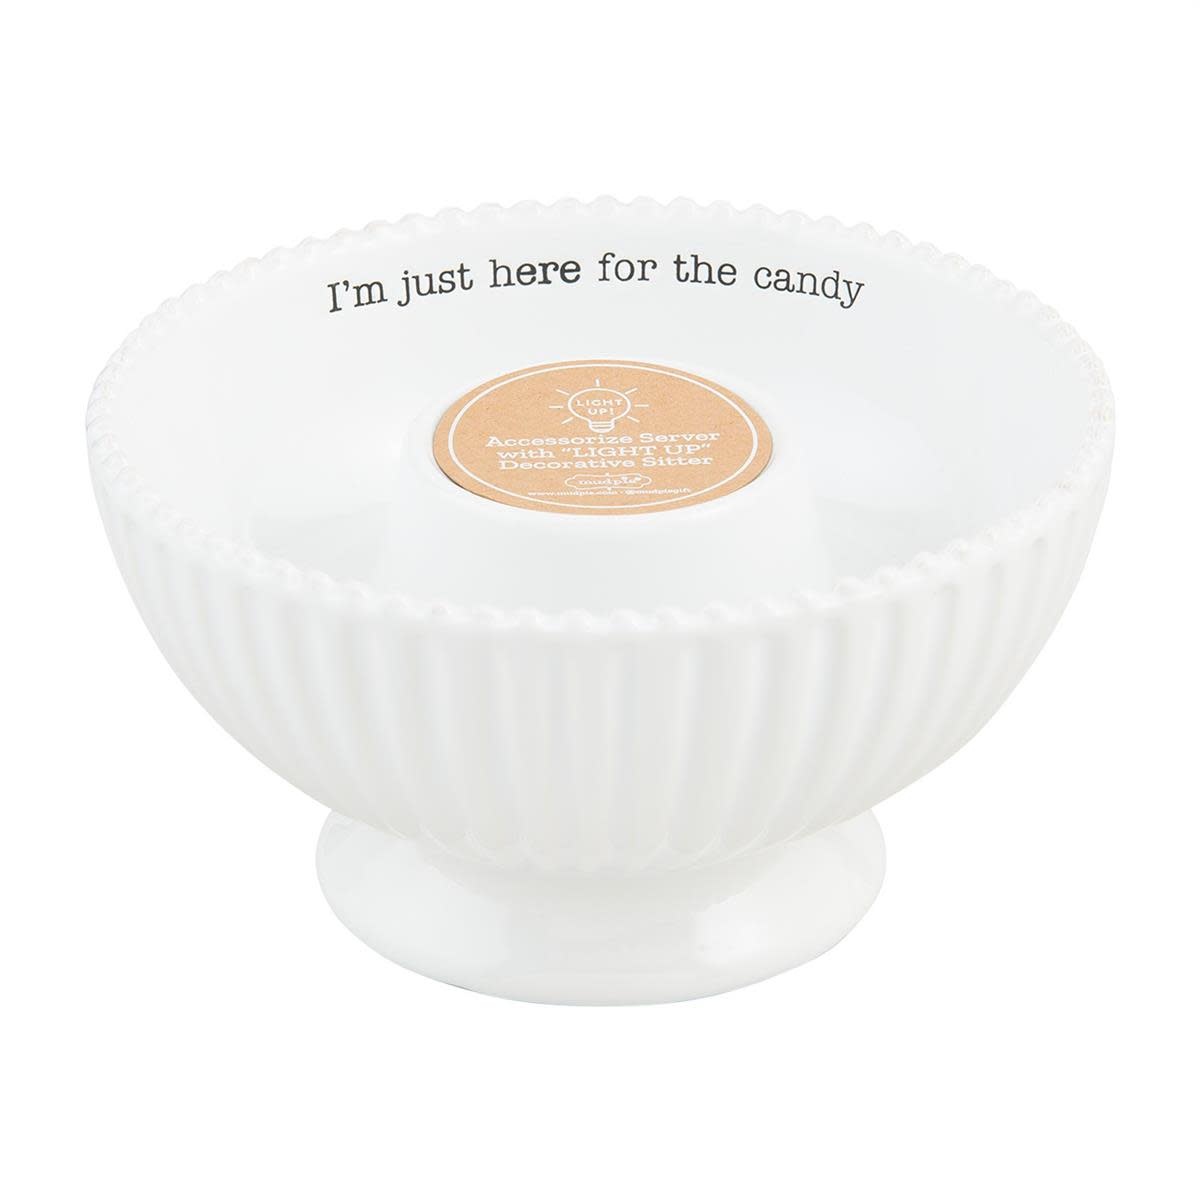 Mudpie Pedestal Candy Bowl (for Light Up Sitters)